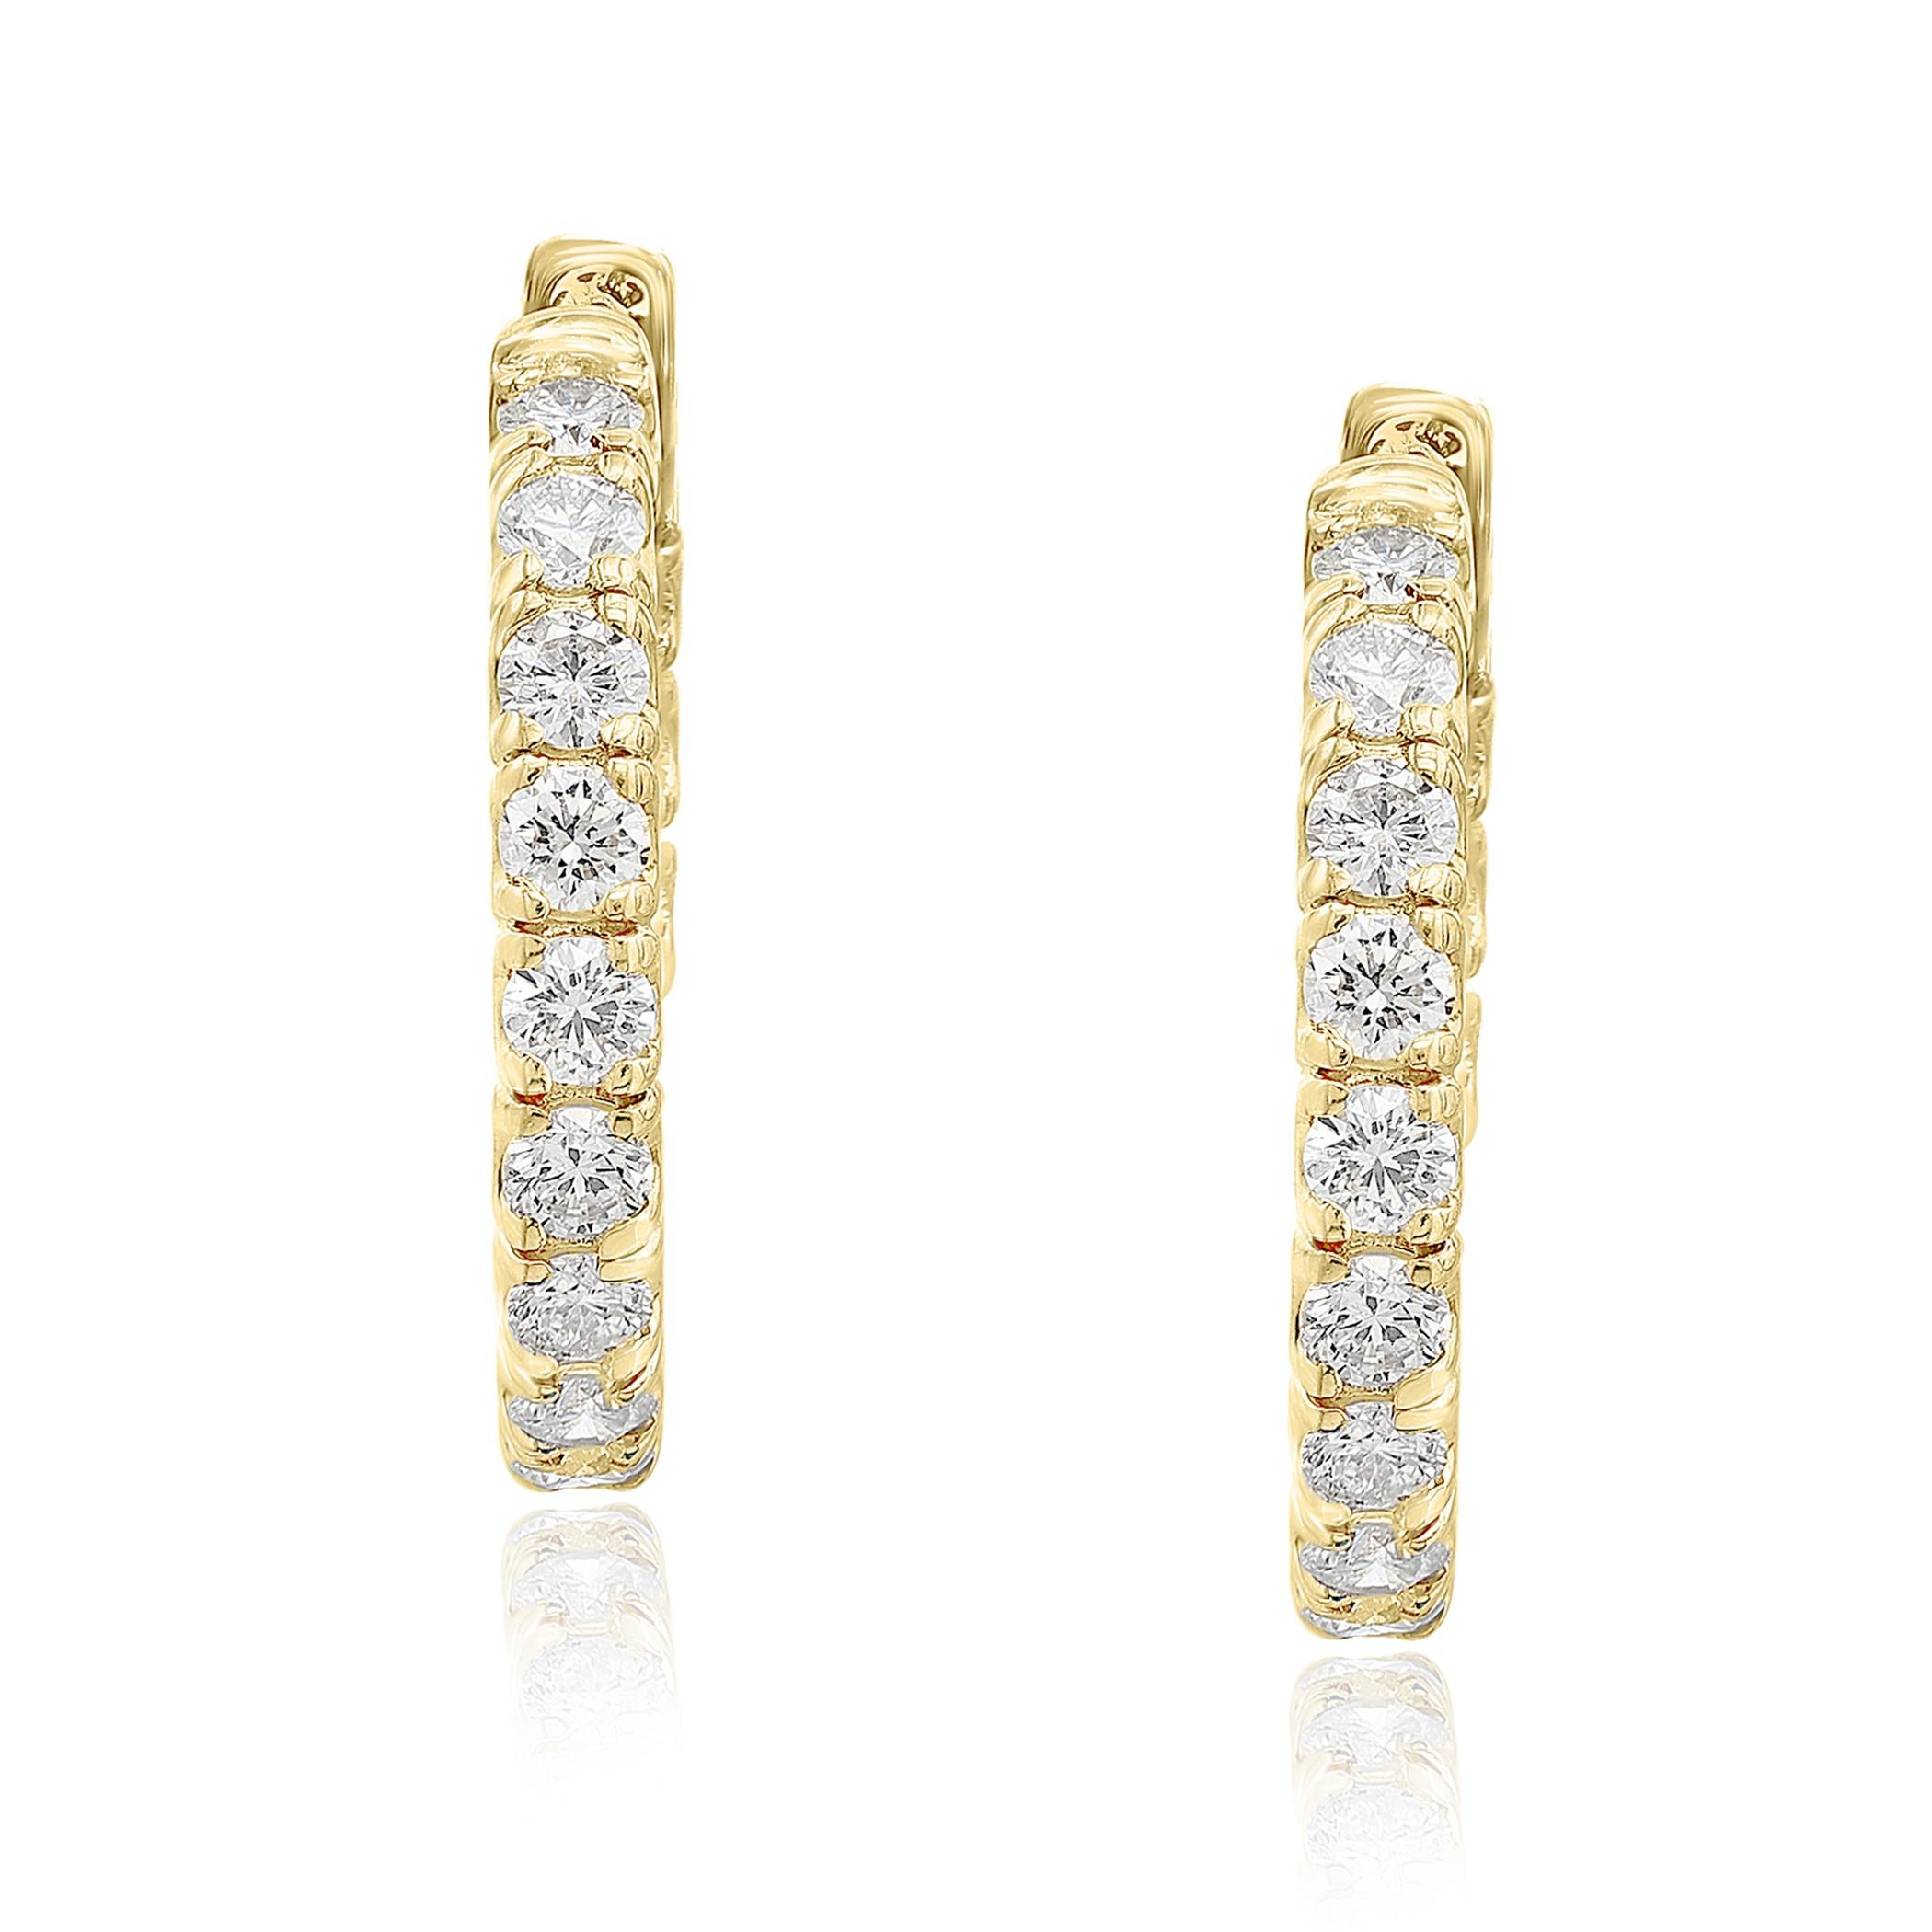 A chic and fashionable pair of hoop earrings showcasing round diamonds, set in 14k yellow gold.  30 Round diamonds weigh 2.03 carats total. A beautiful piece of jewelry.
All diamonds are GH color SI1 Clarity.
Style is available in different price